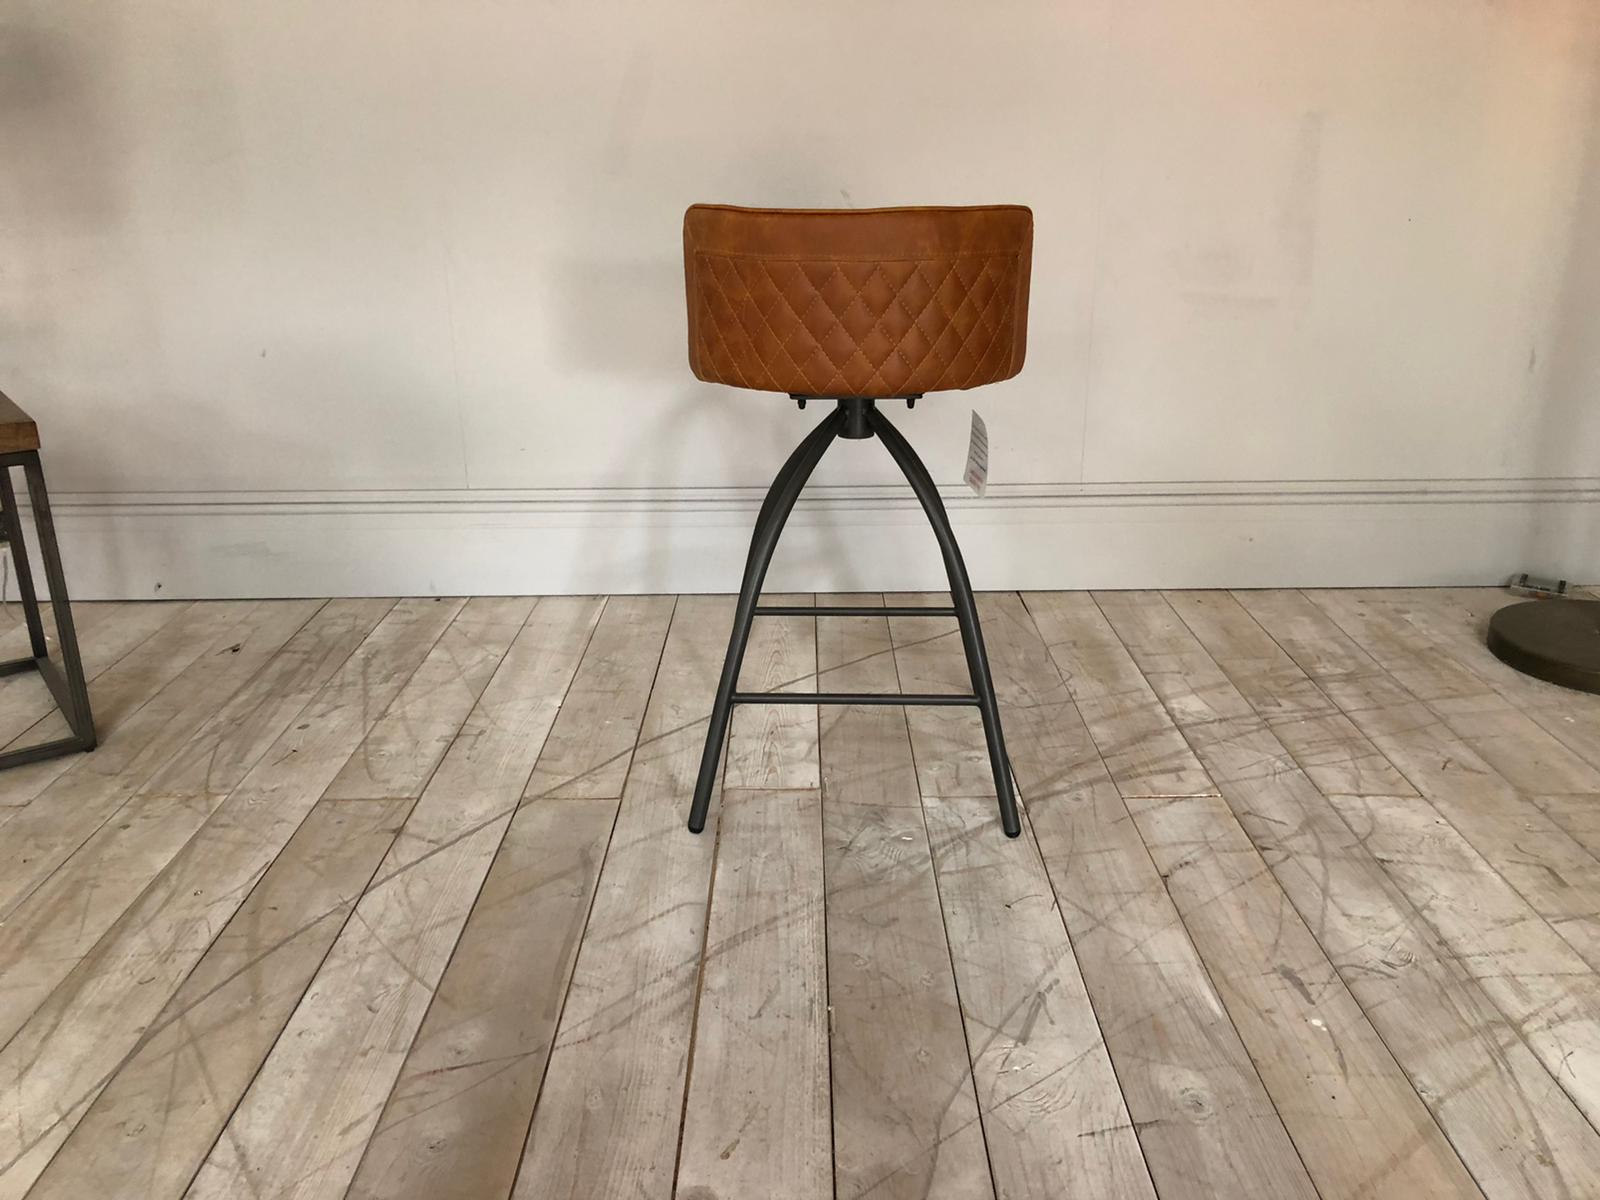 Dillon high back bar stool available from Top Secret Furniture